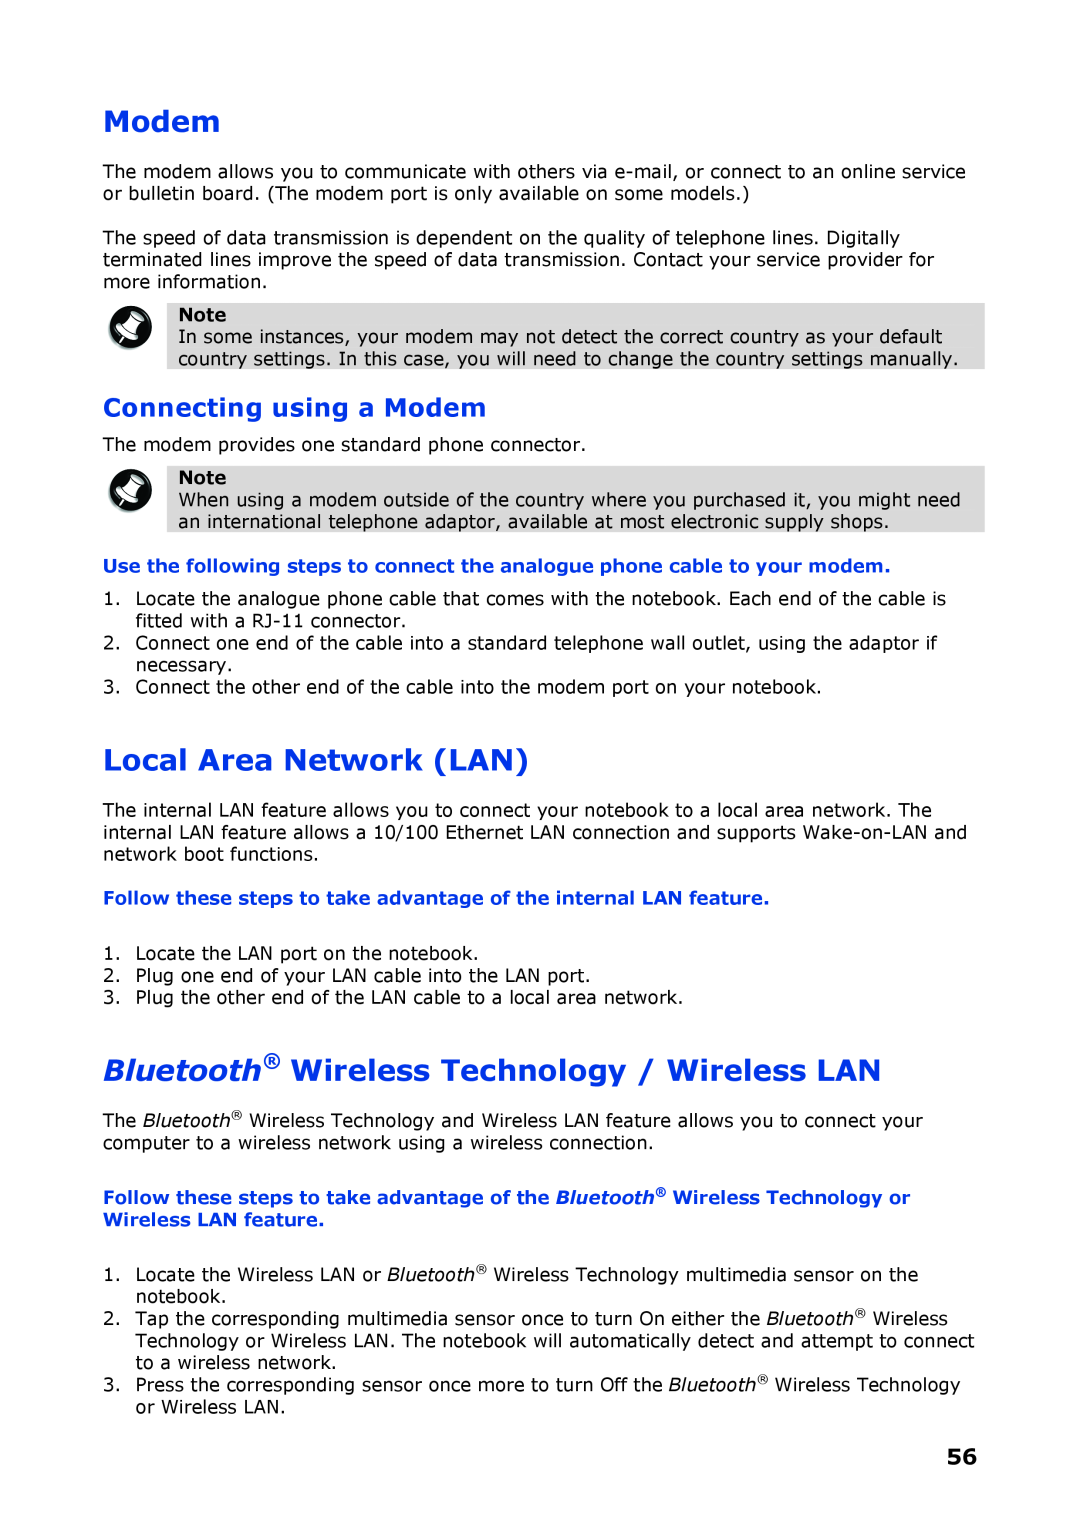 NEC P8510 manual Local Area Network LAN, Bluetooth Wireless Technology / Wireless LAN, Connecting using a Modem 